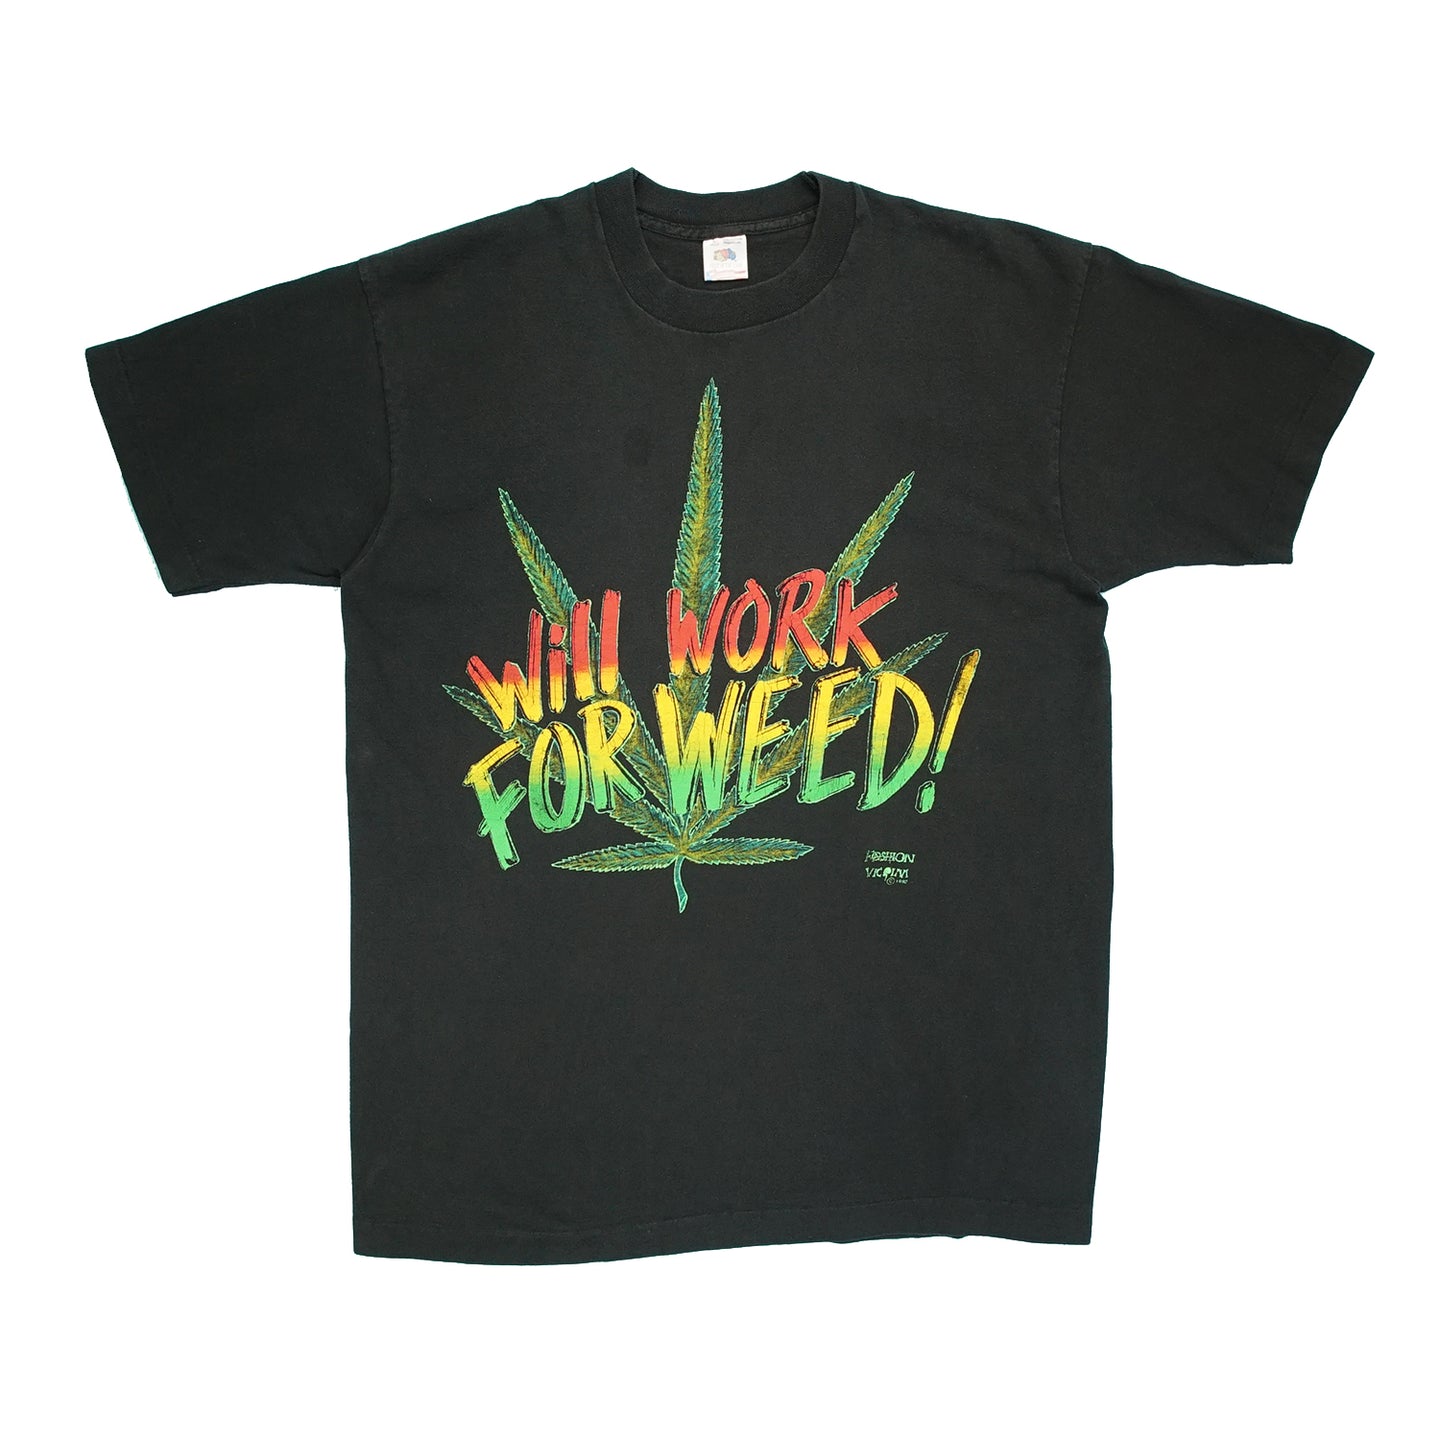 1992 Will work for Weed! Fashion Victim tee L